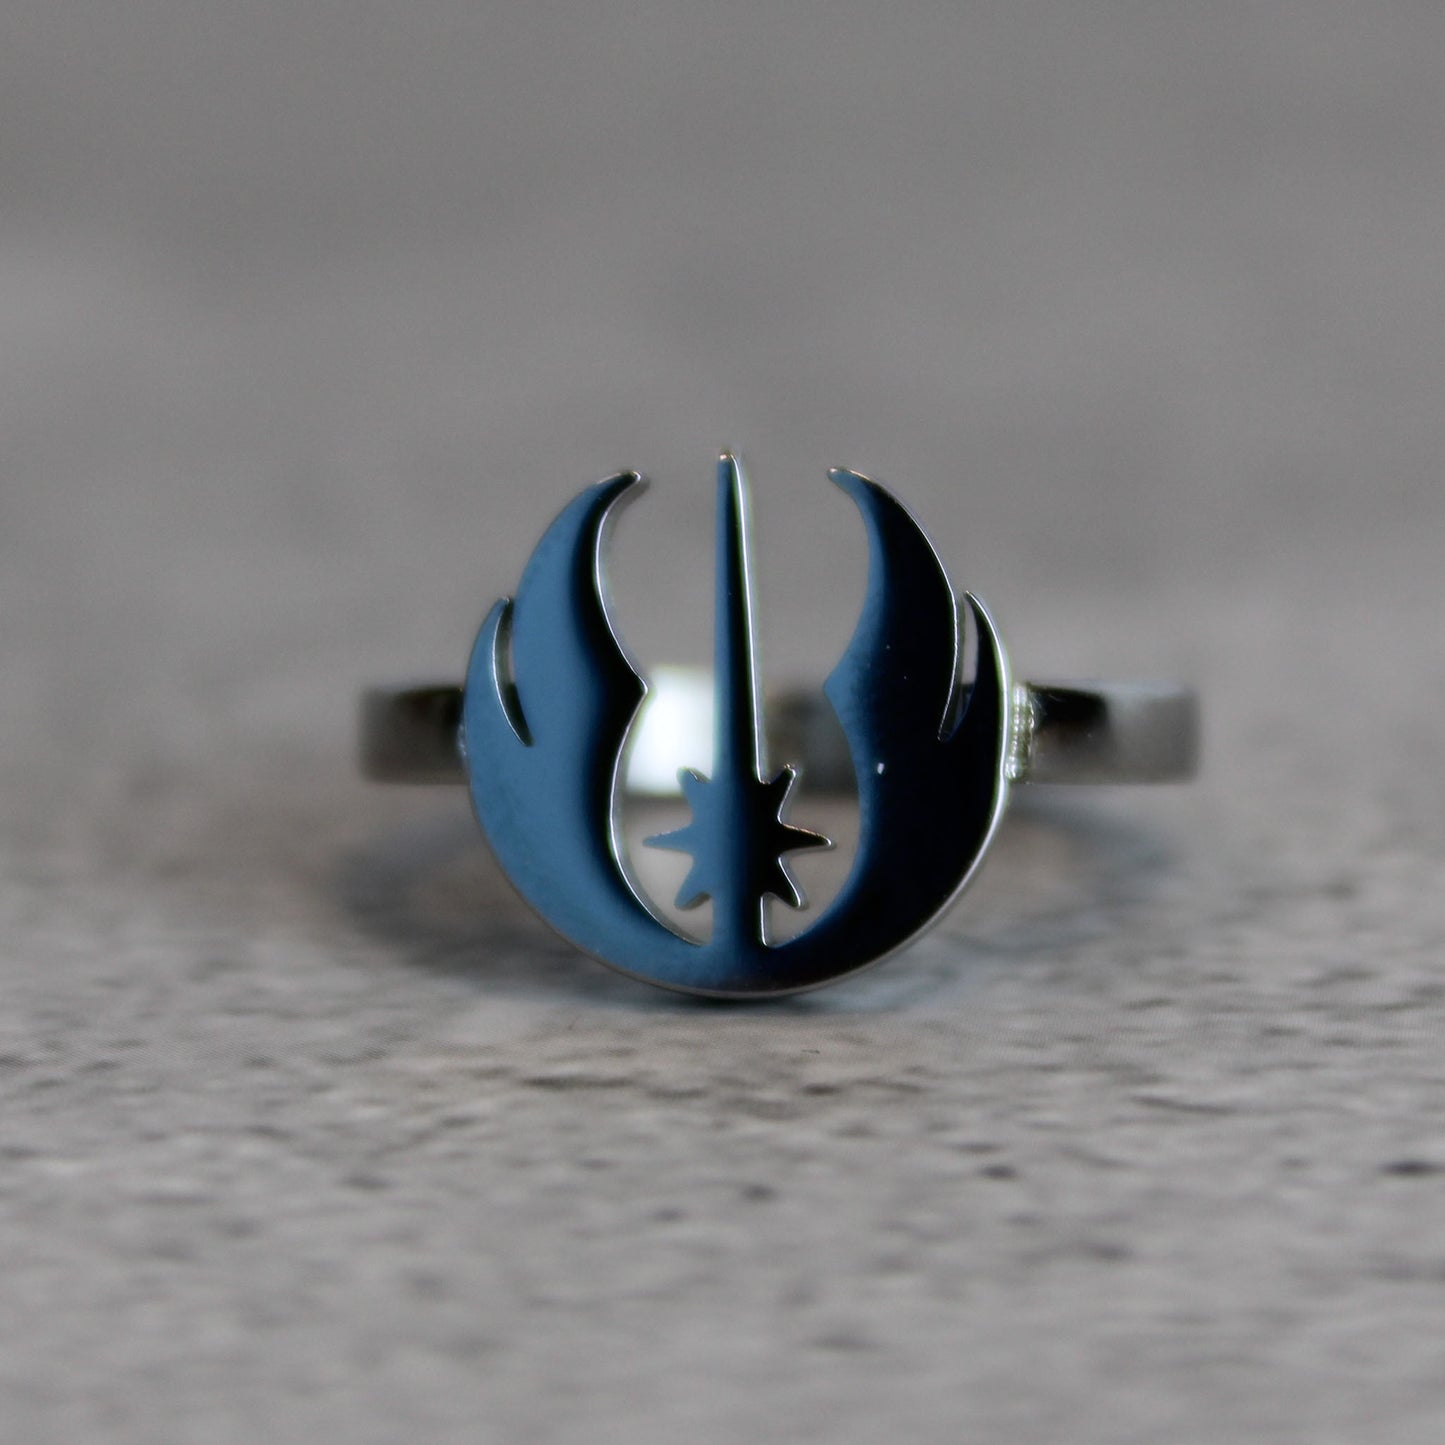 Jedi Order (Star Wars) Cut Out Ring